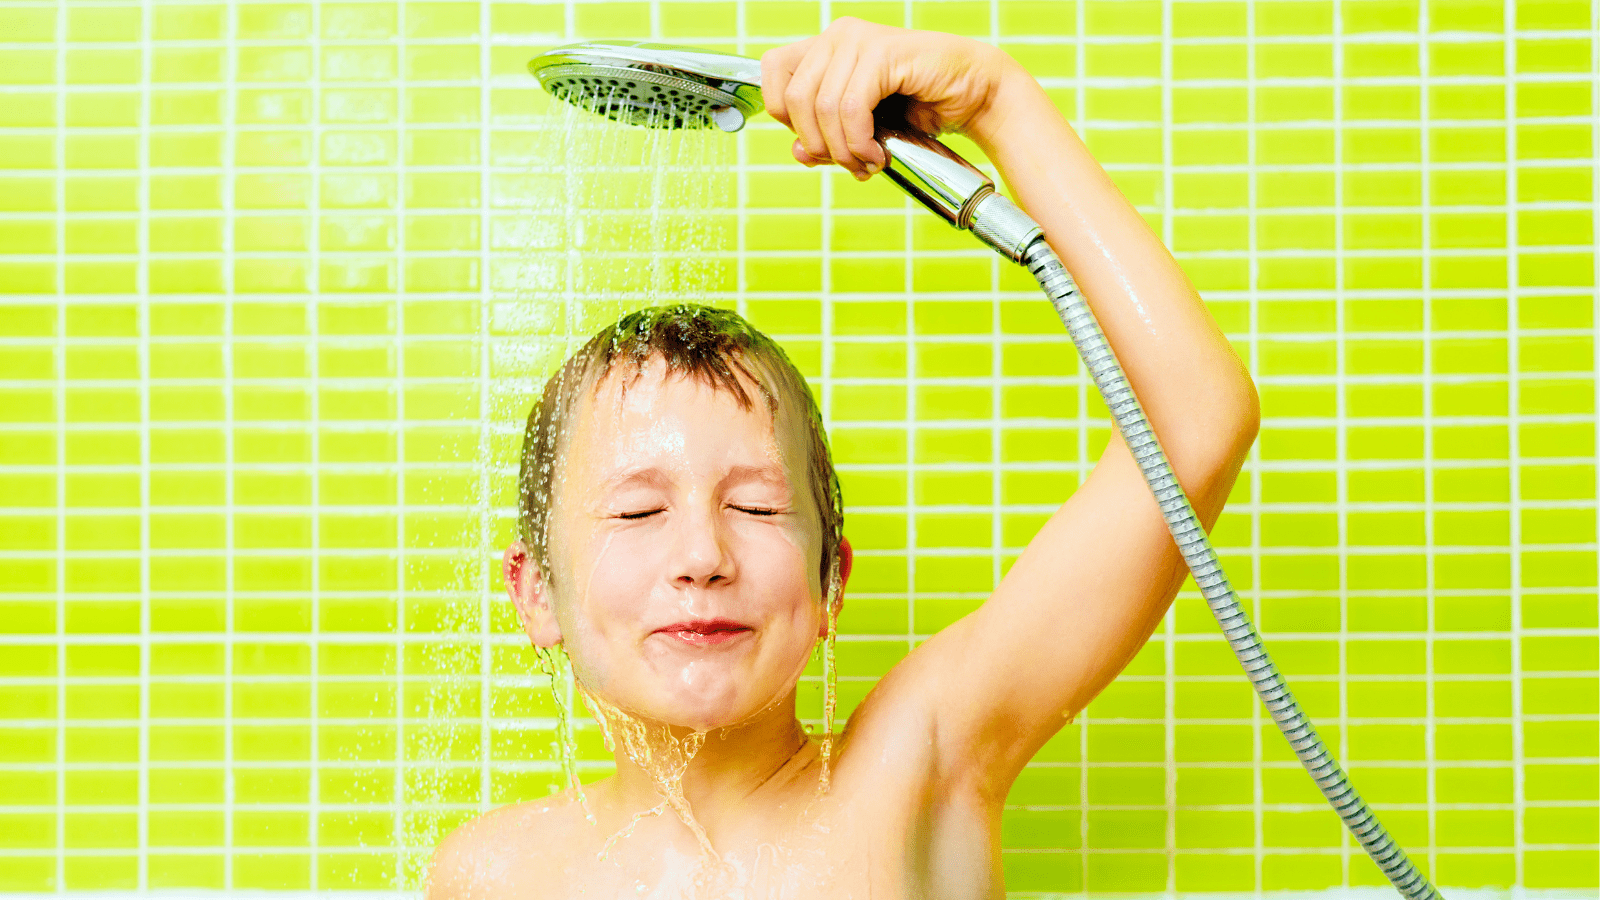 Boy in the Bathtub Washes His Head with Water Sprayed from the S